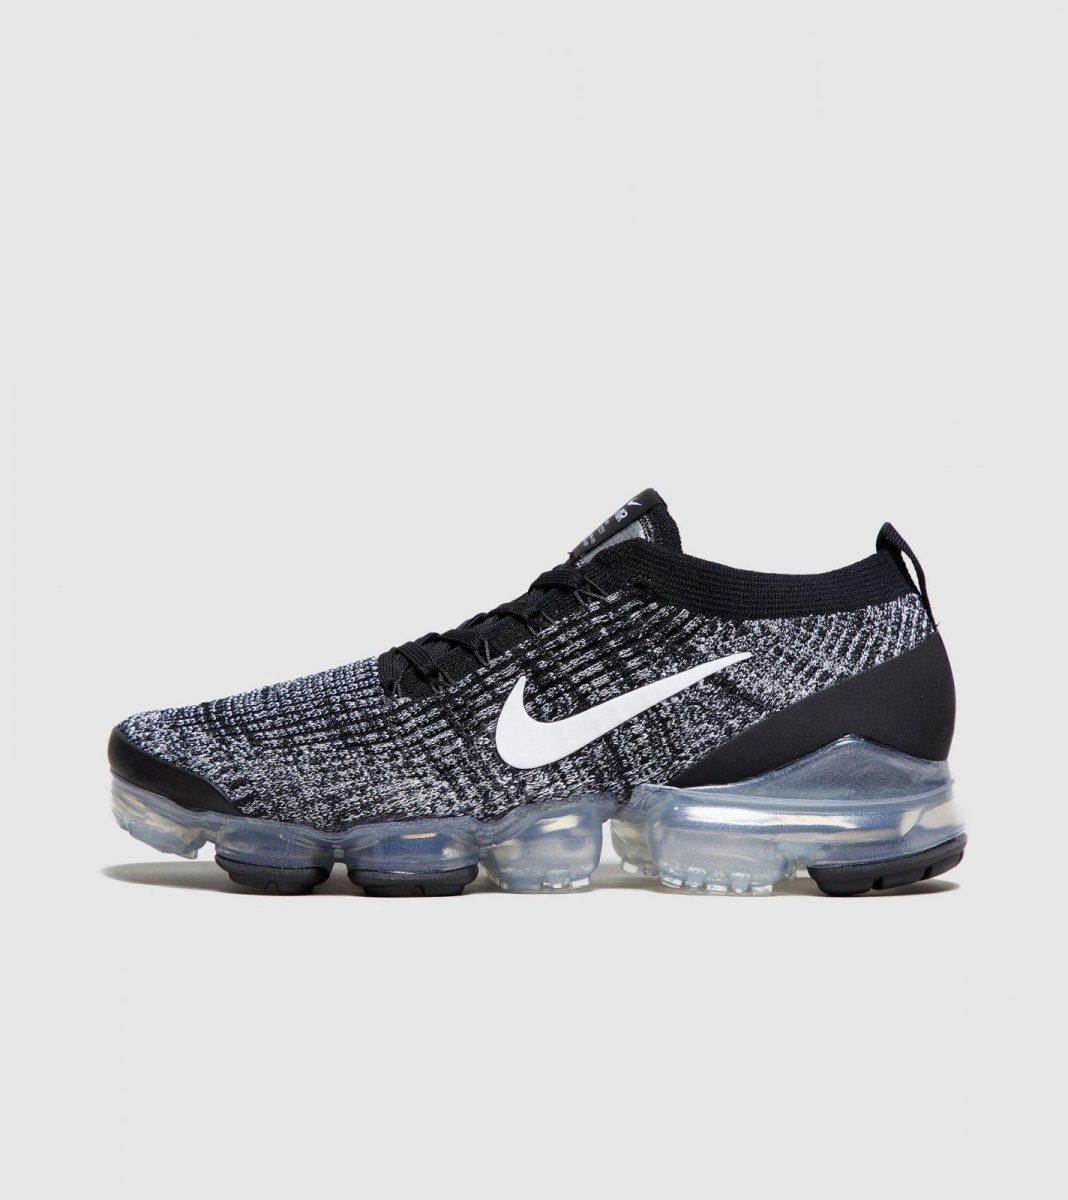 when did nike air vapormax flyknit 3 come out